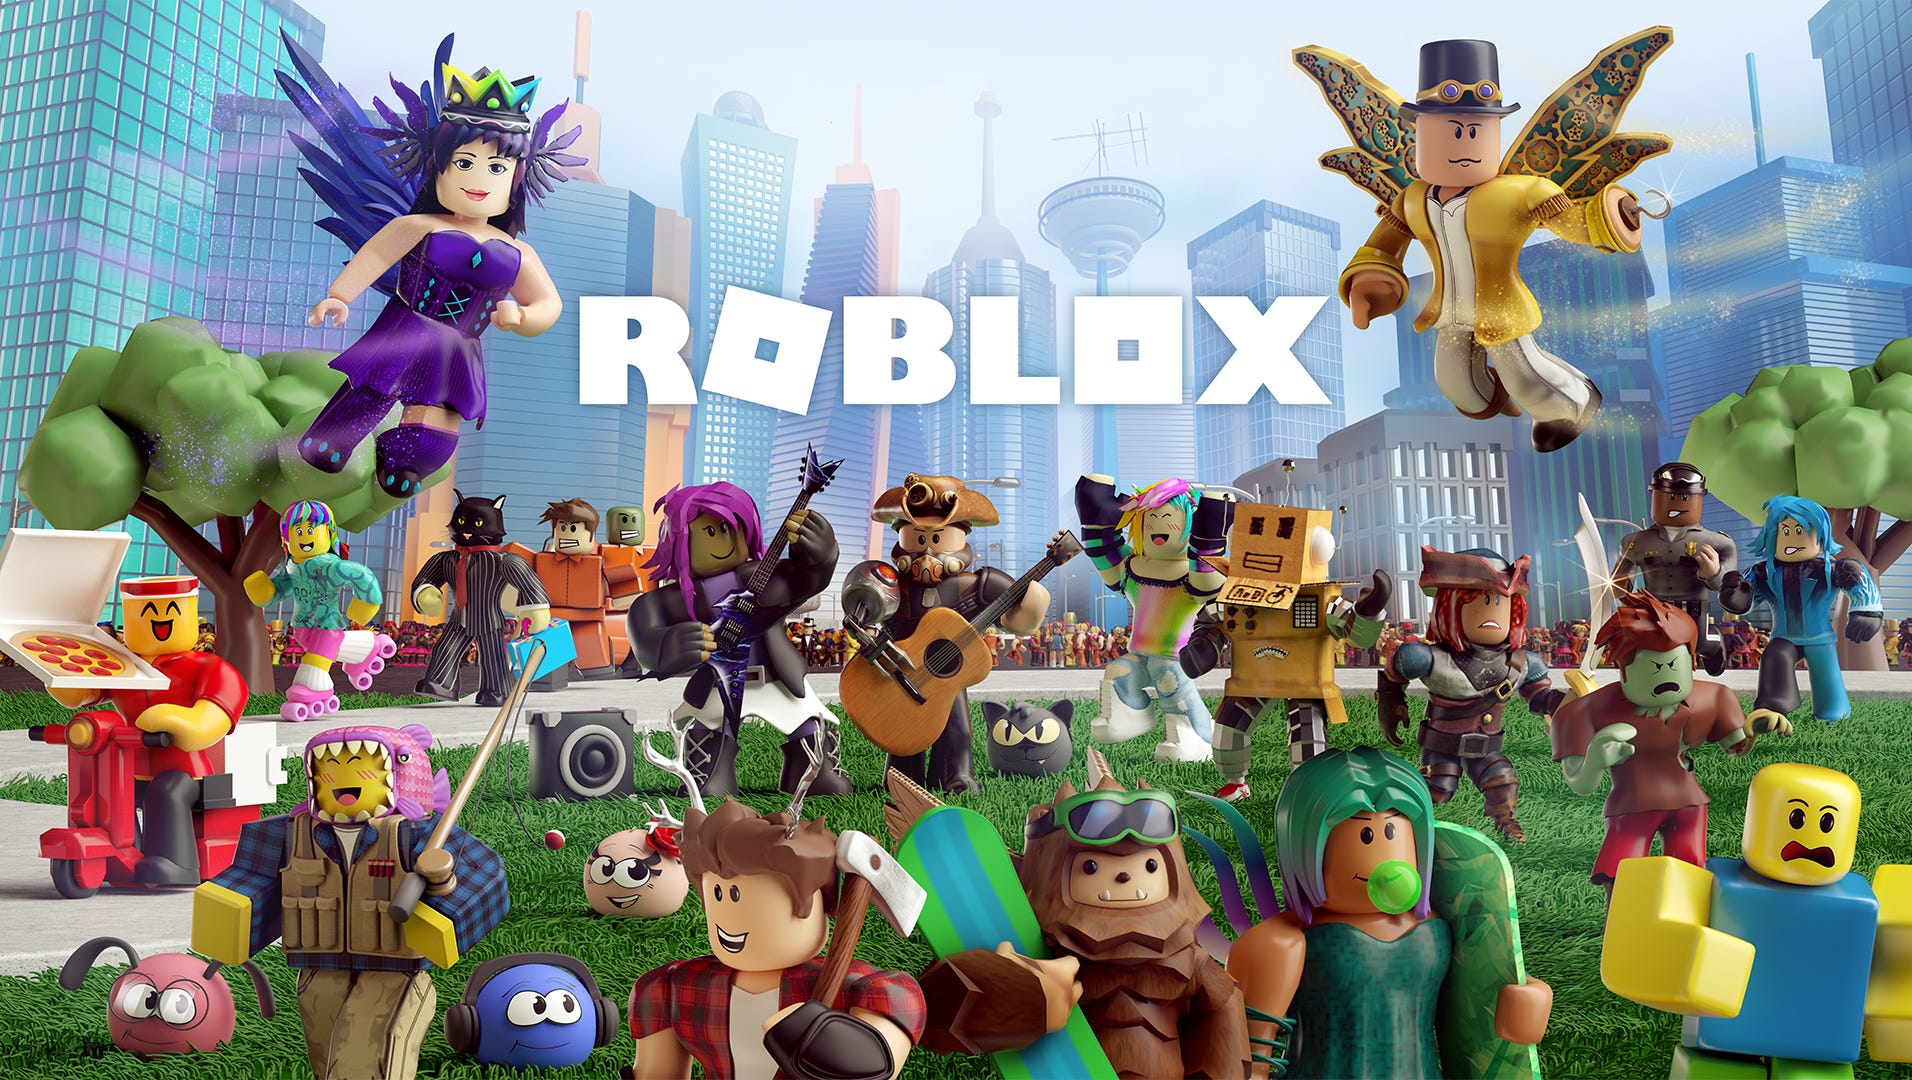 Roblox Kids Game Shows Character Being Sexually Violated - north carolina mom warns of popular roblox video game after